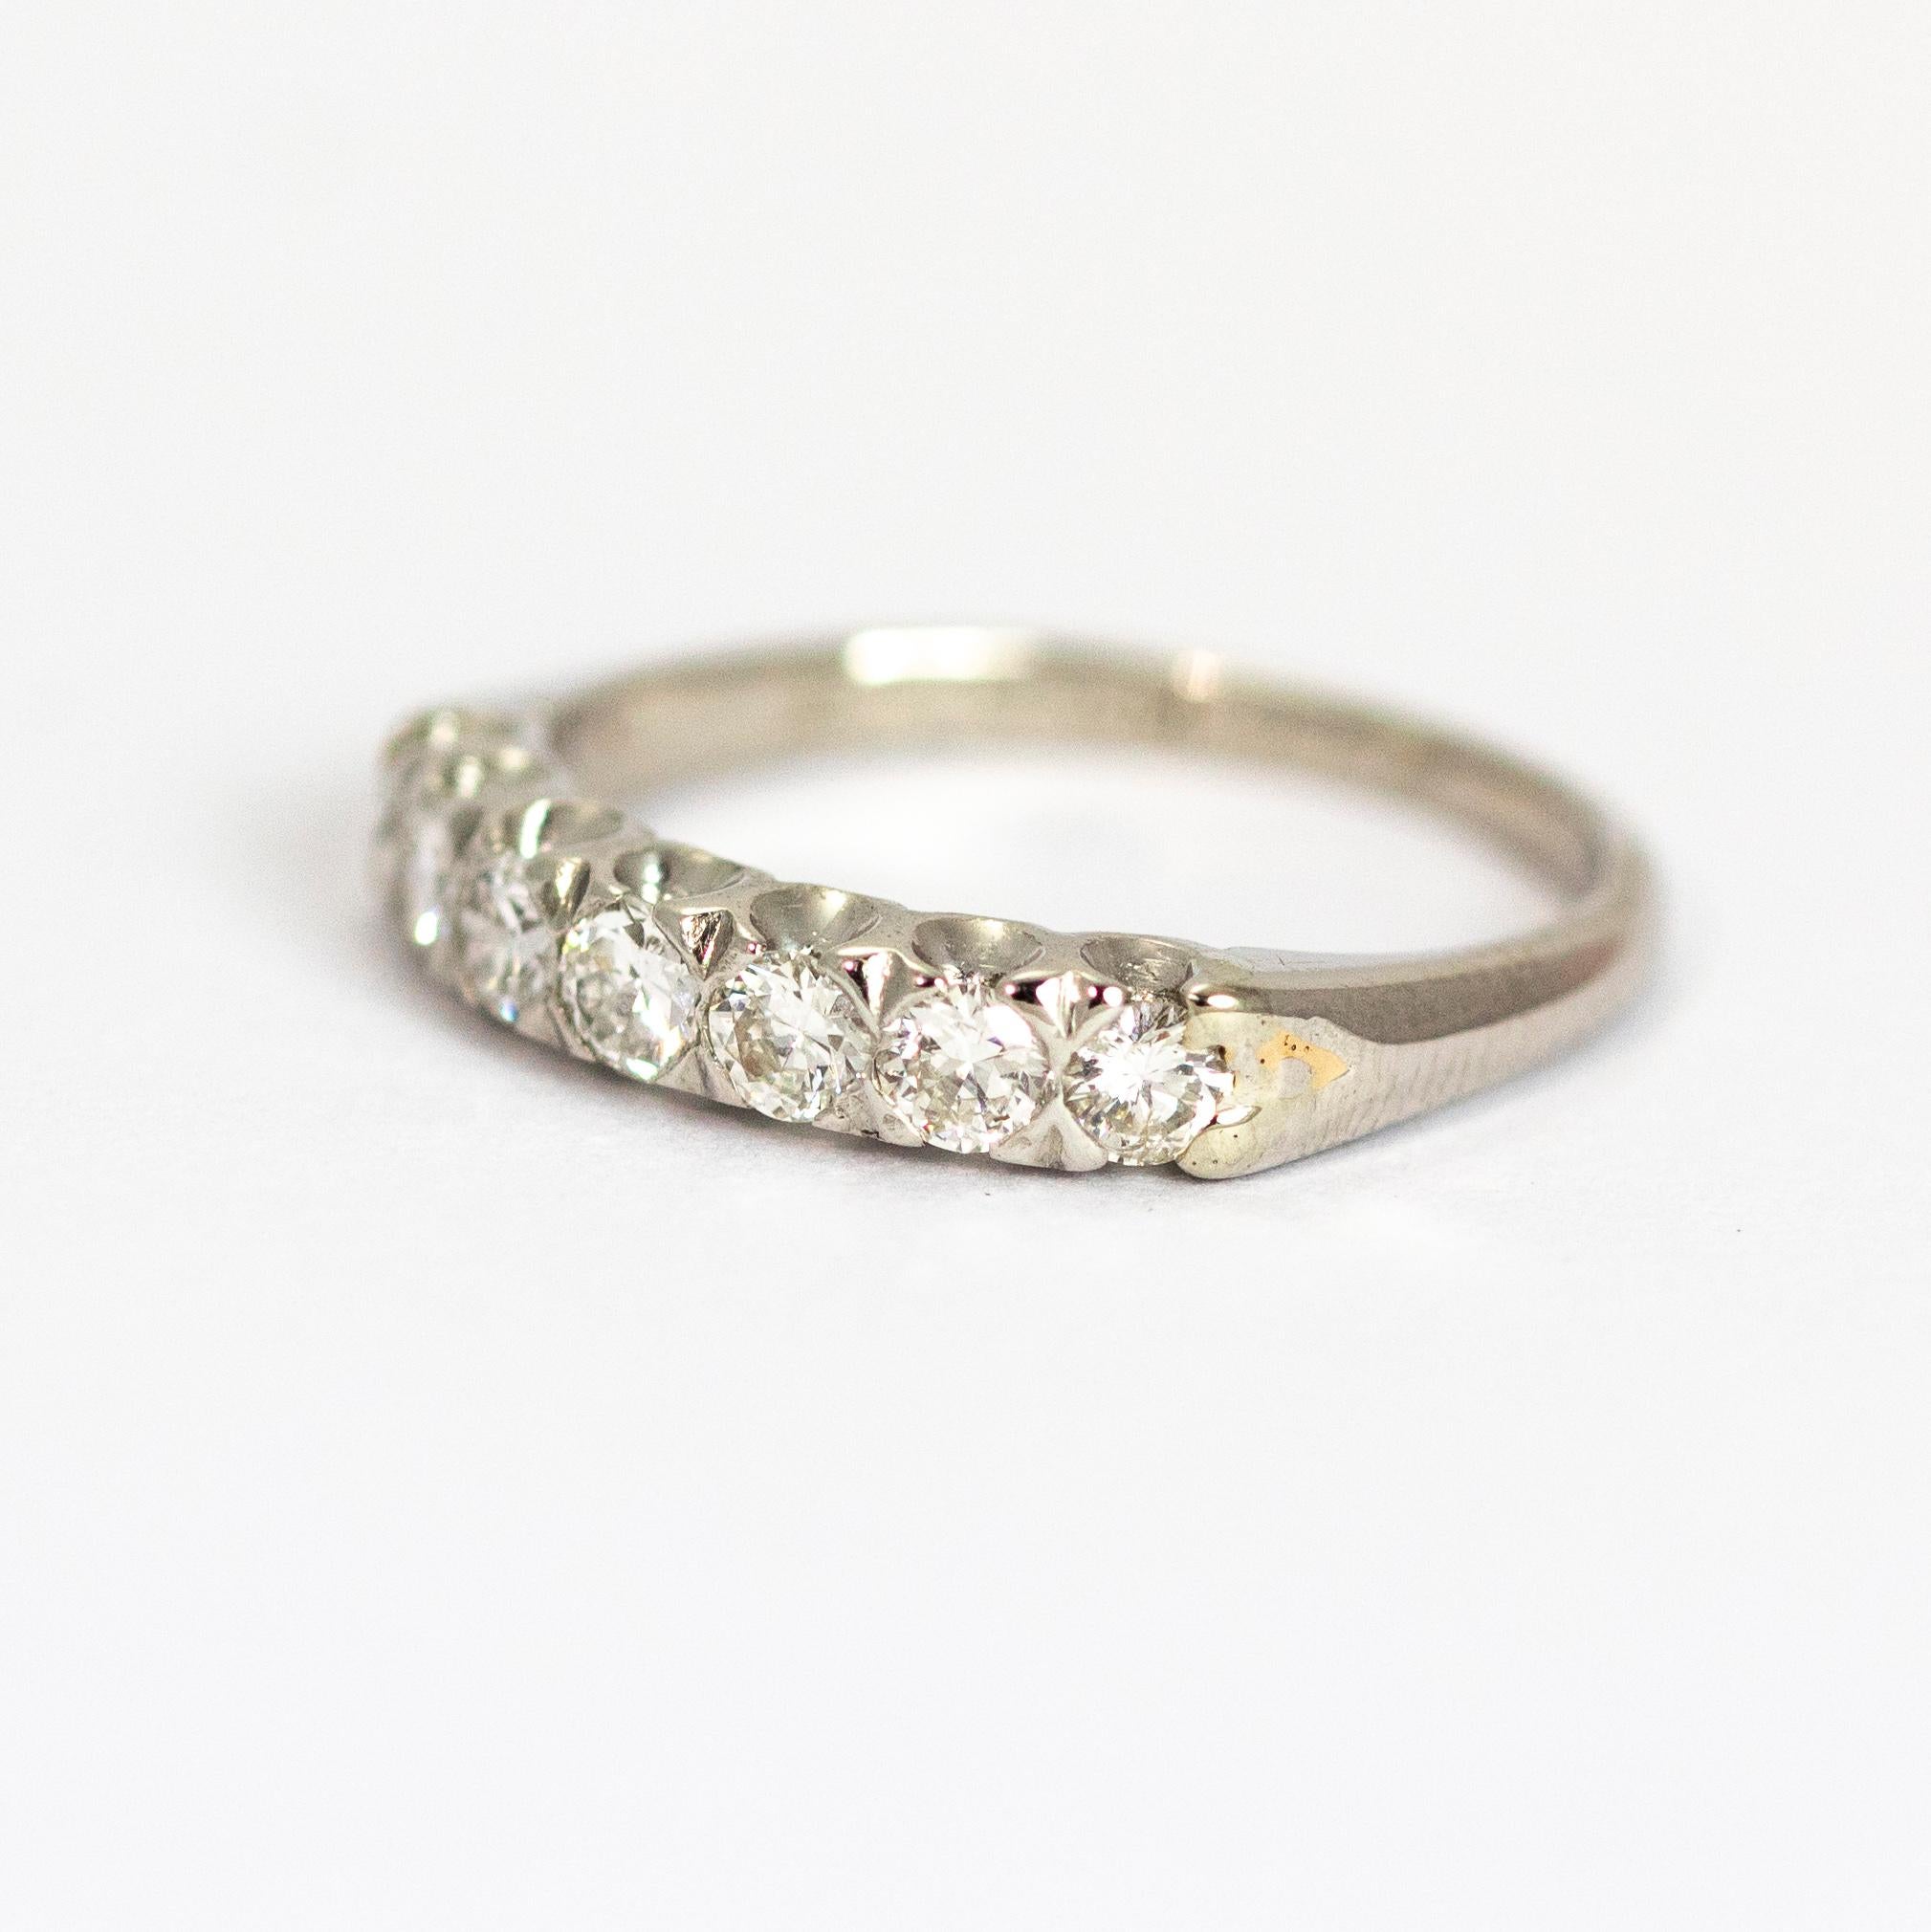 The seven bright diamonds really sparkle in this ring, each diamond measures 10pts and the ring holds a total of 70pts worth of diamonds which are set flush into the band. This half eternity is modelled out of Platinum.

Ring Size: J 1/2 or 5
Band